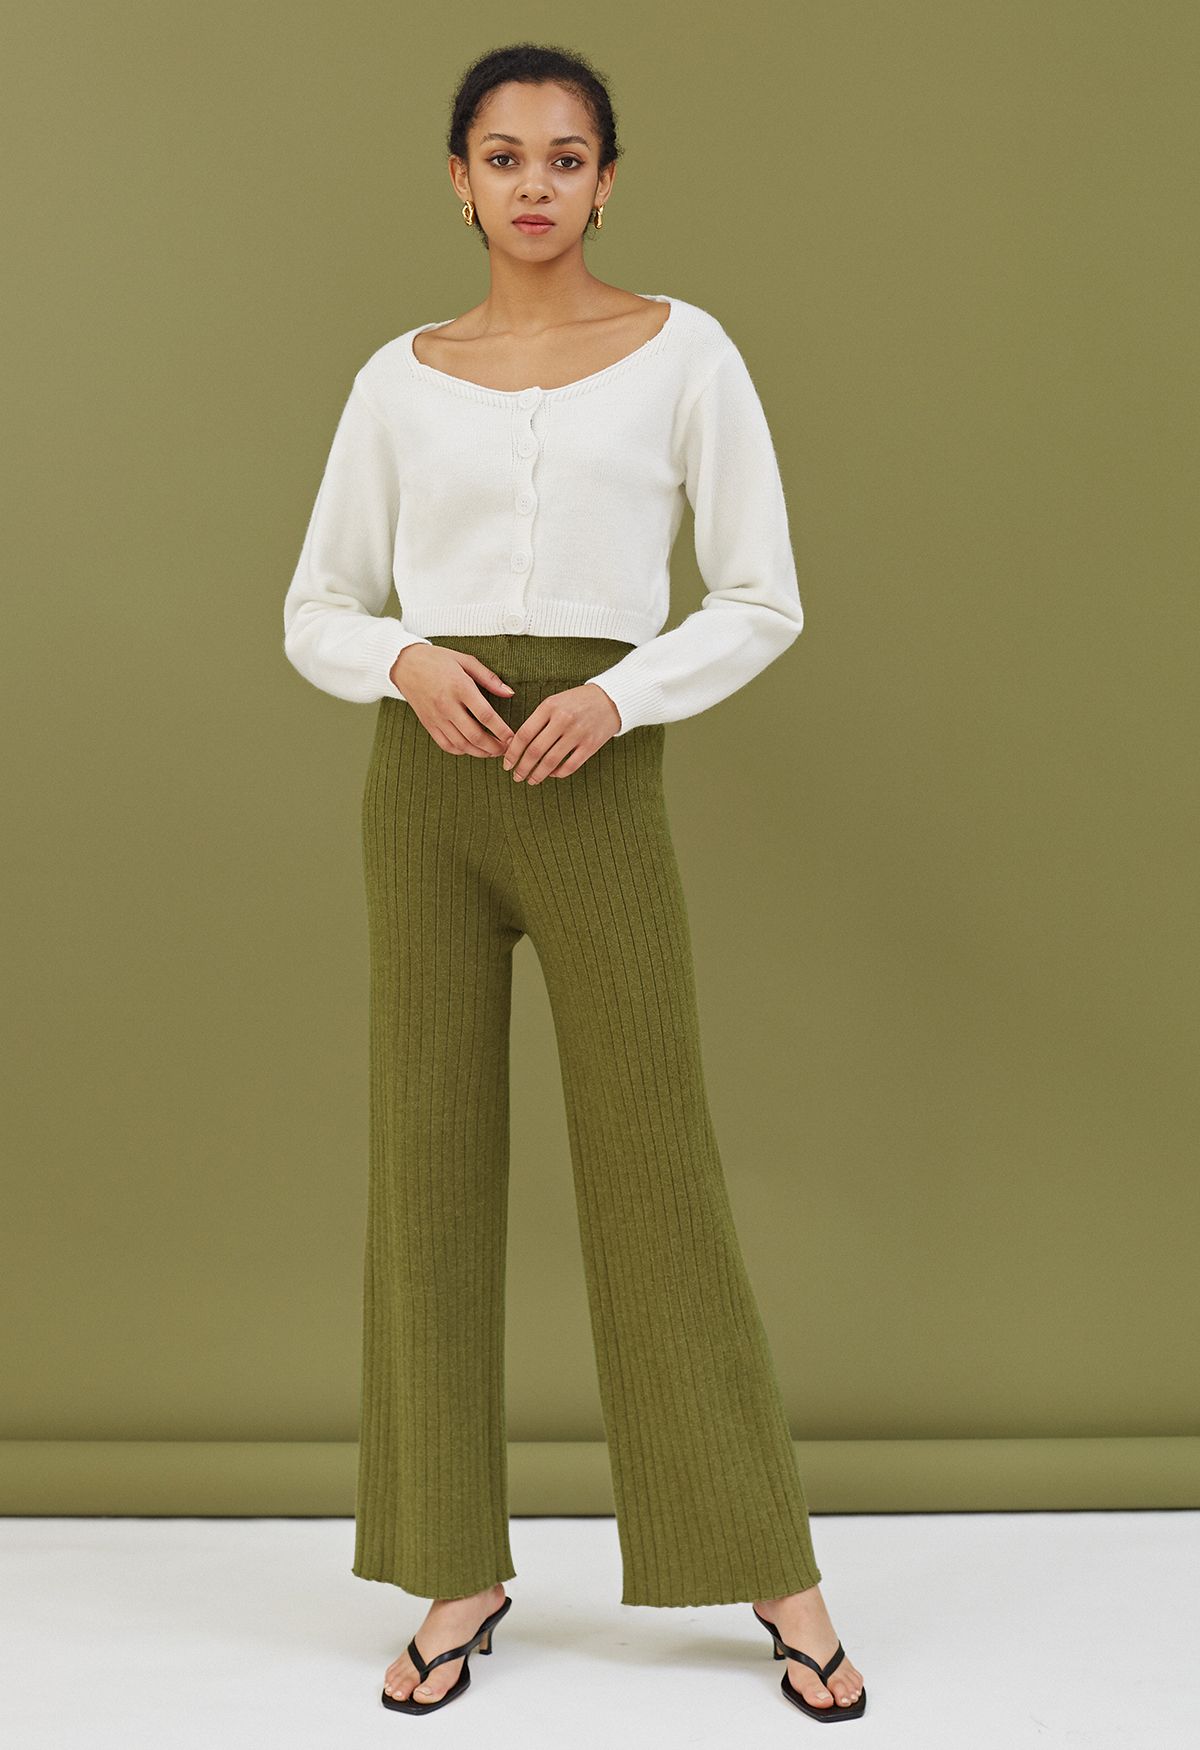 Ribbed Straight Leg Knit Pants in Moss Green